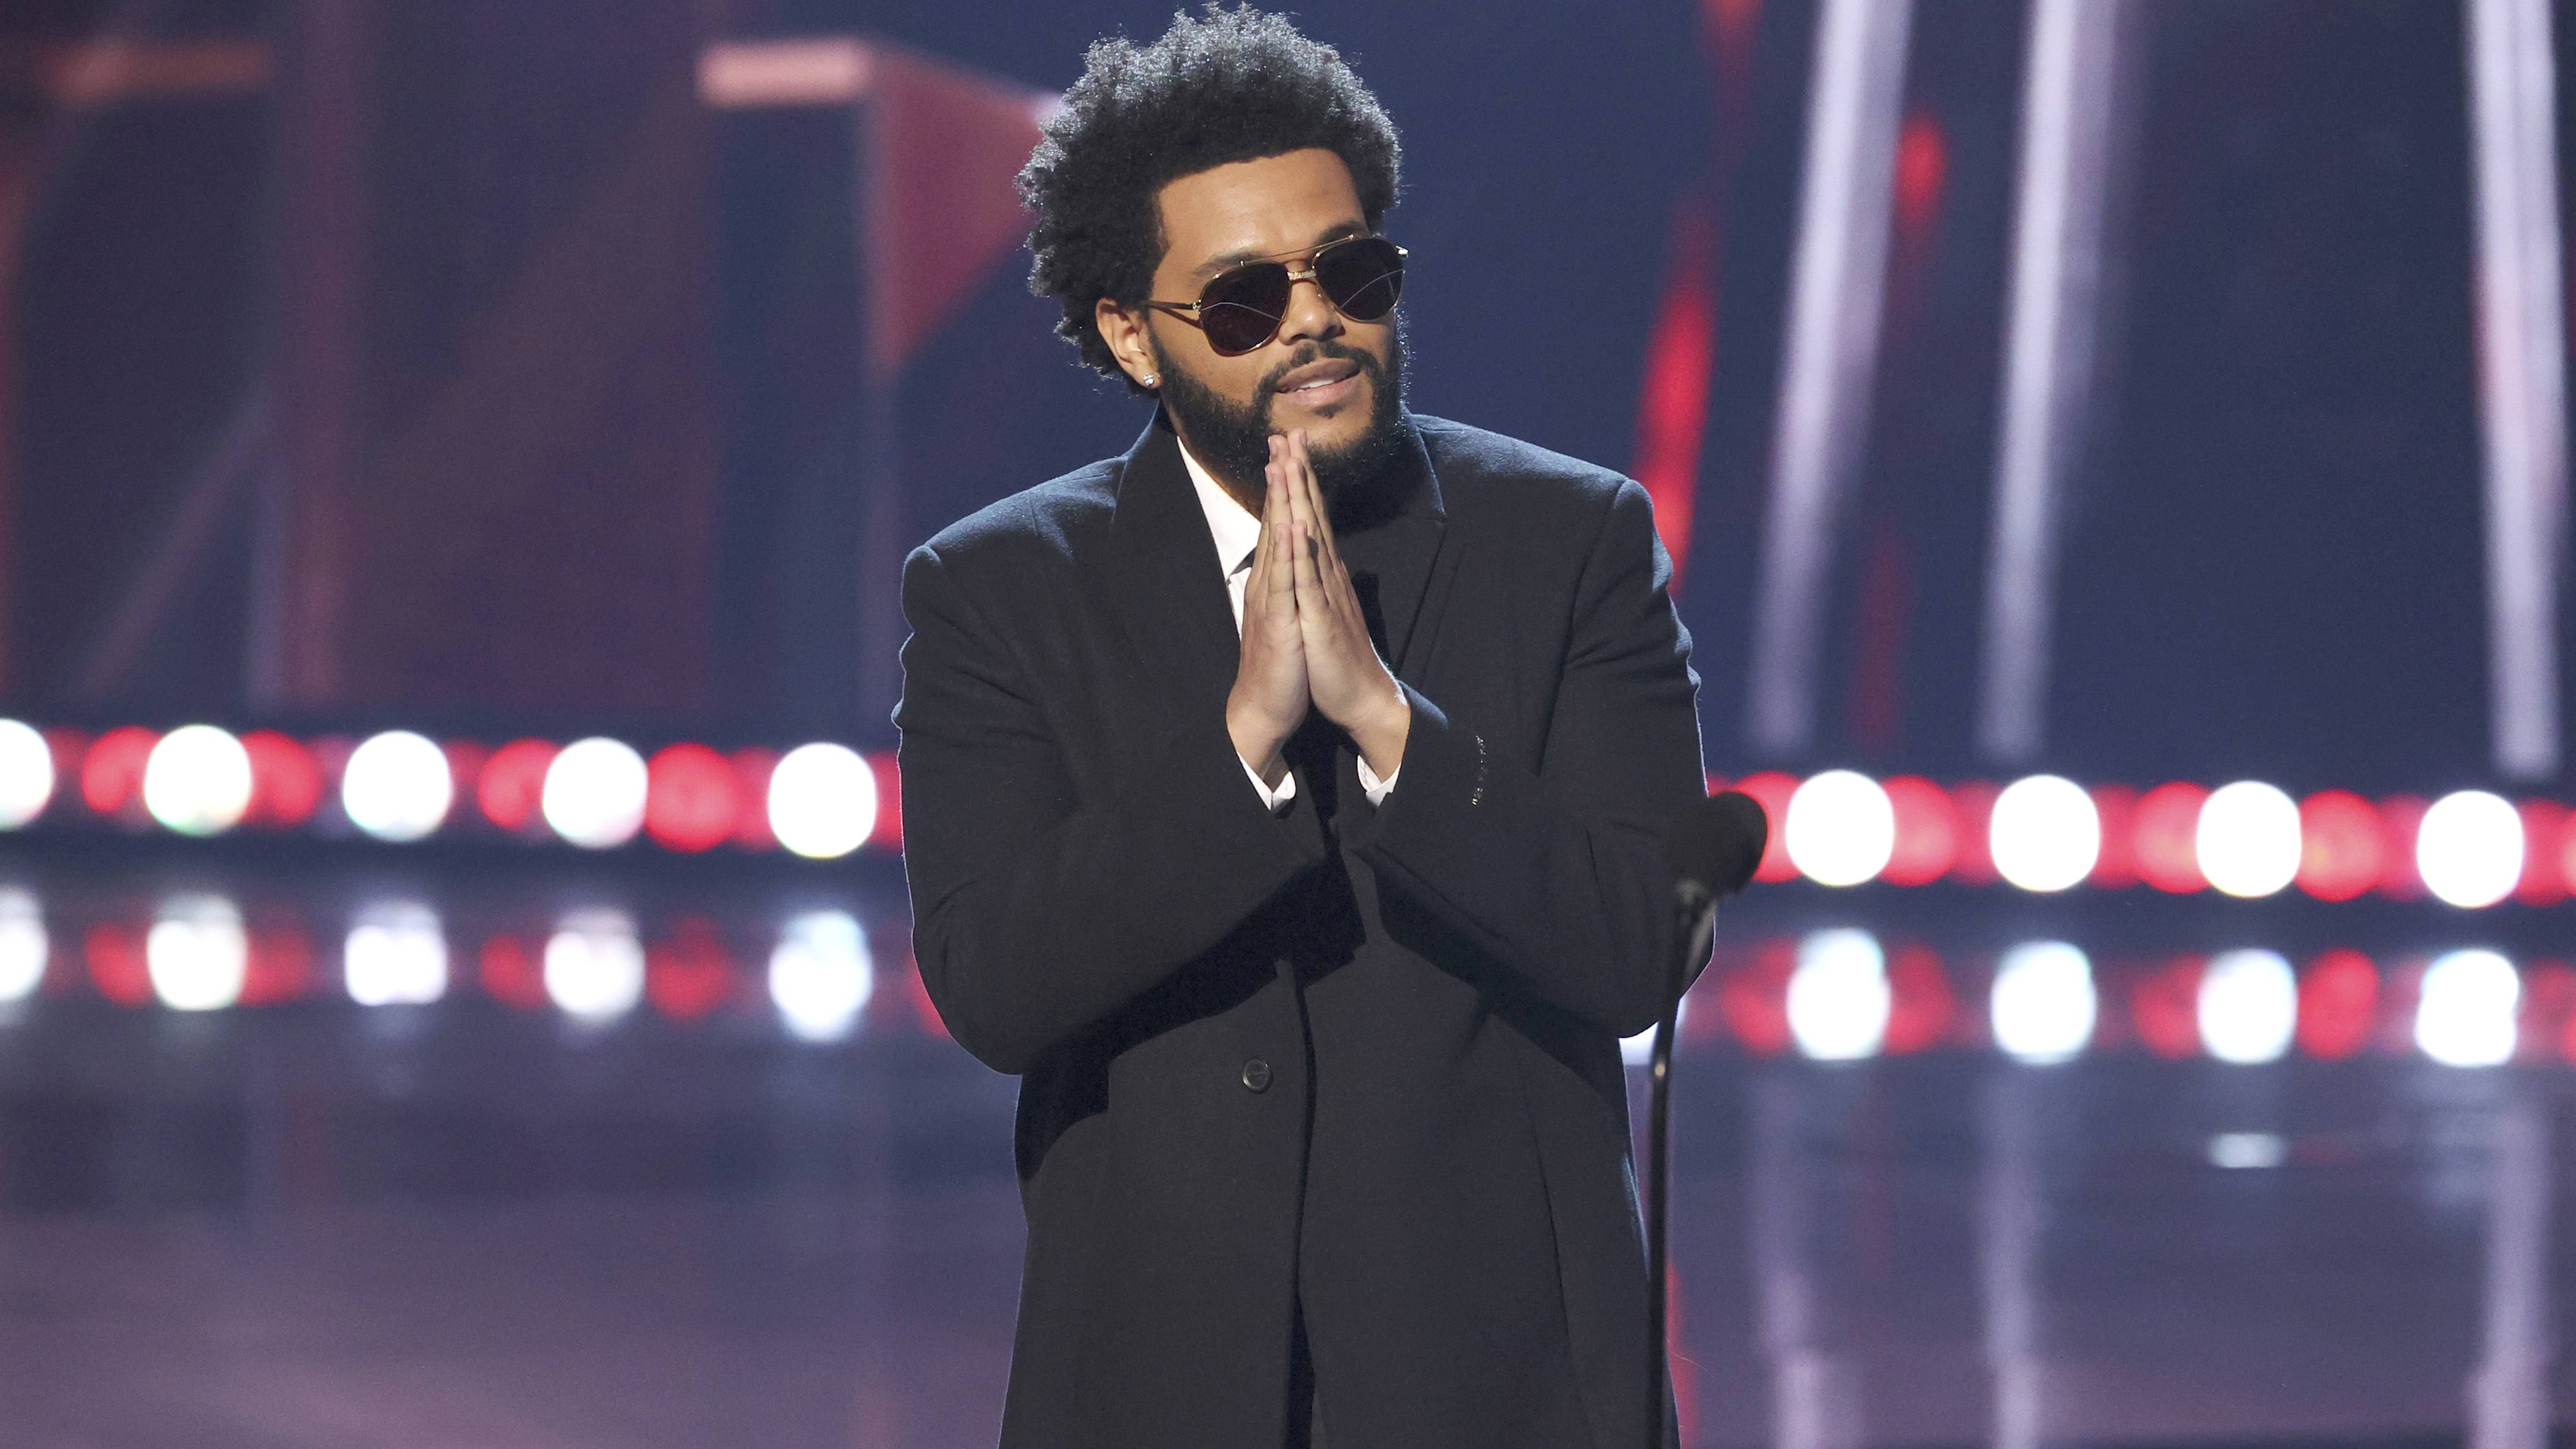 Is the Weeknd pop, R&B or hip-hop? Why the distinction matters at